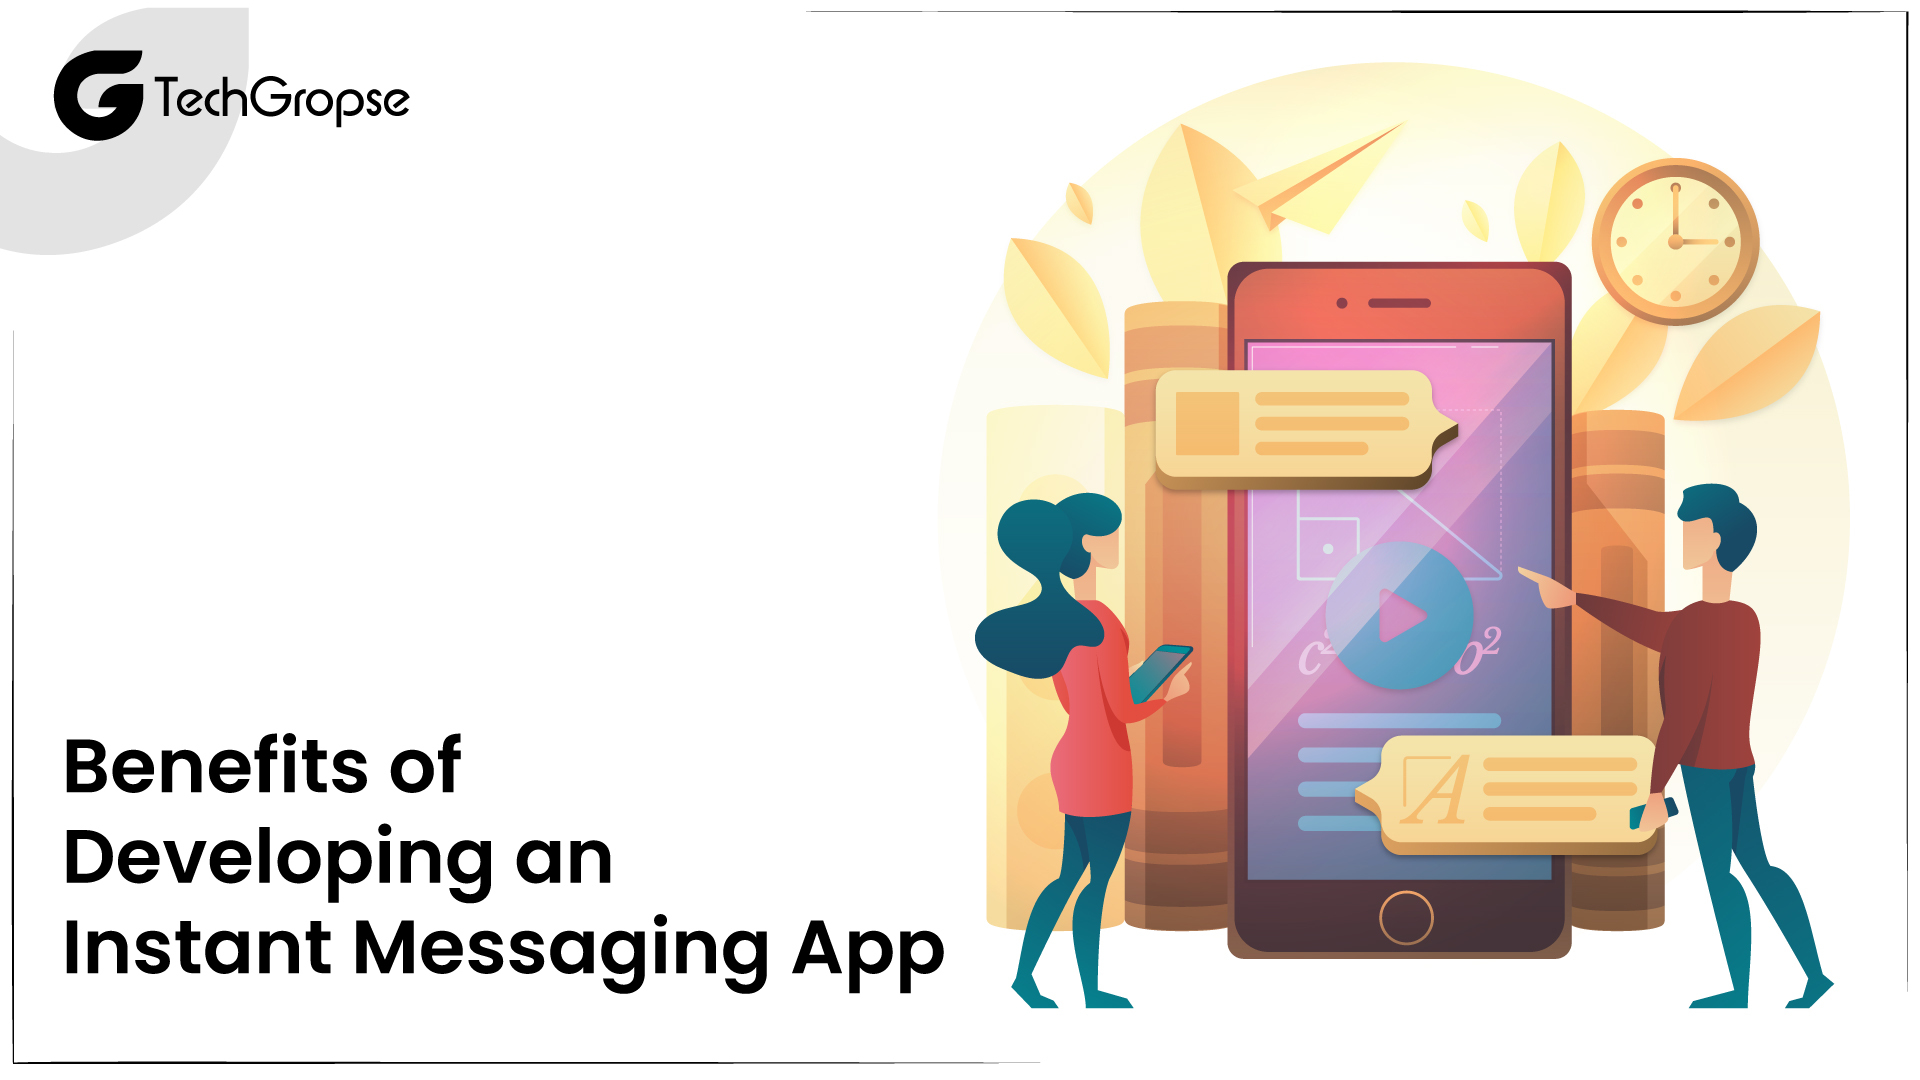 Benefits of Developing an Instant Messaging App